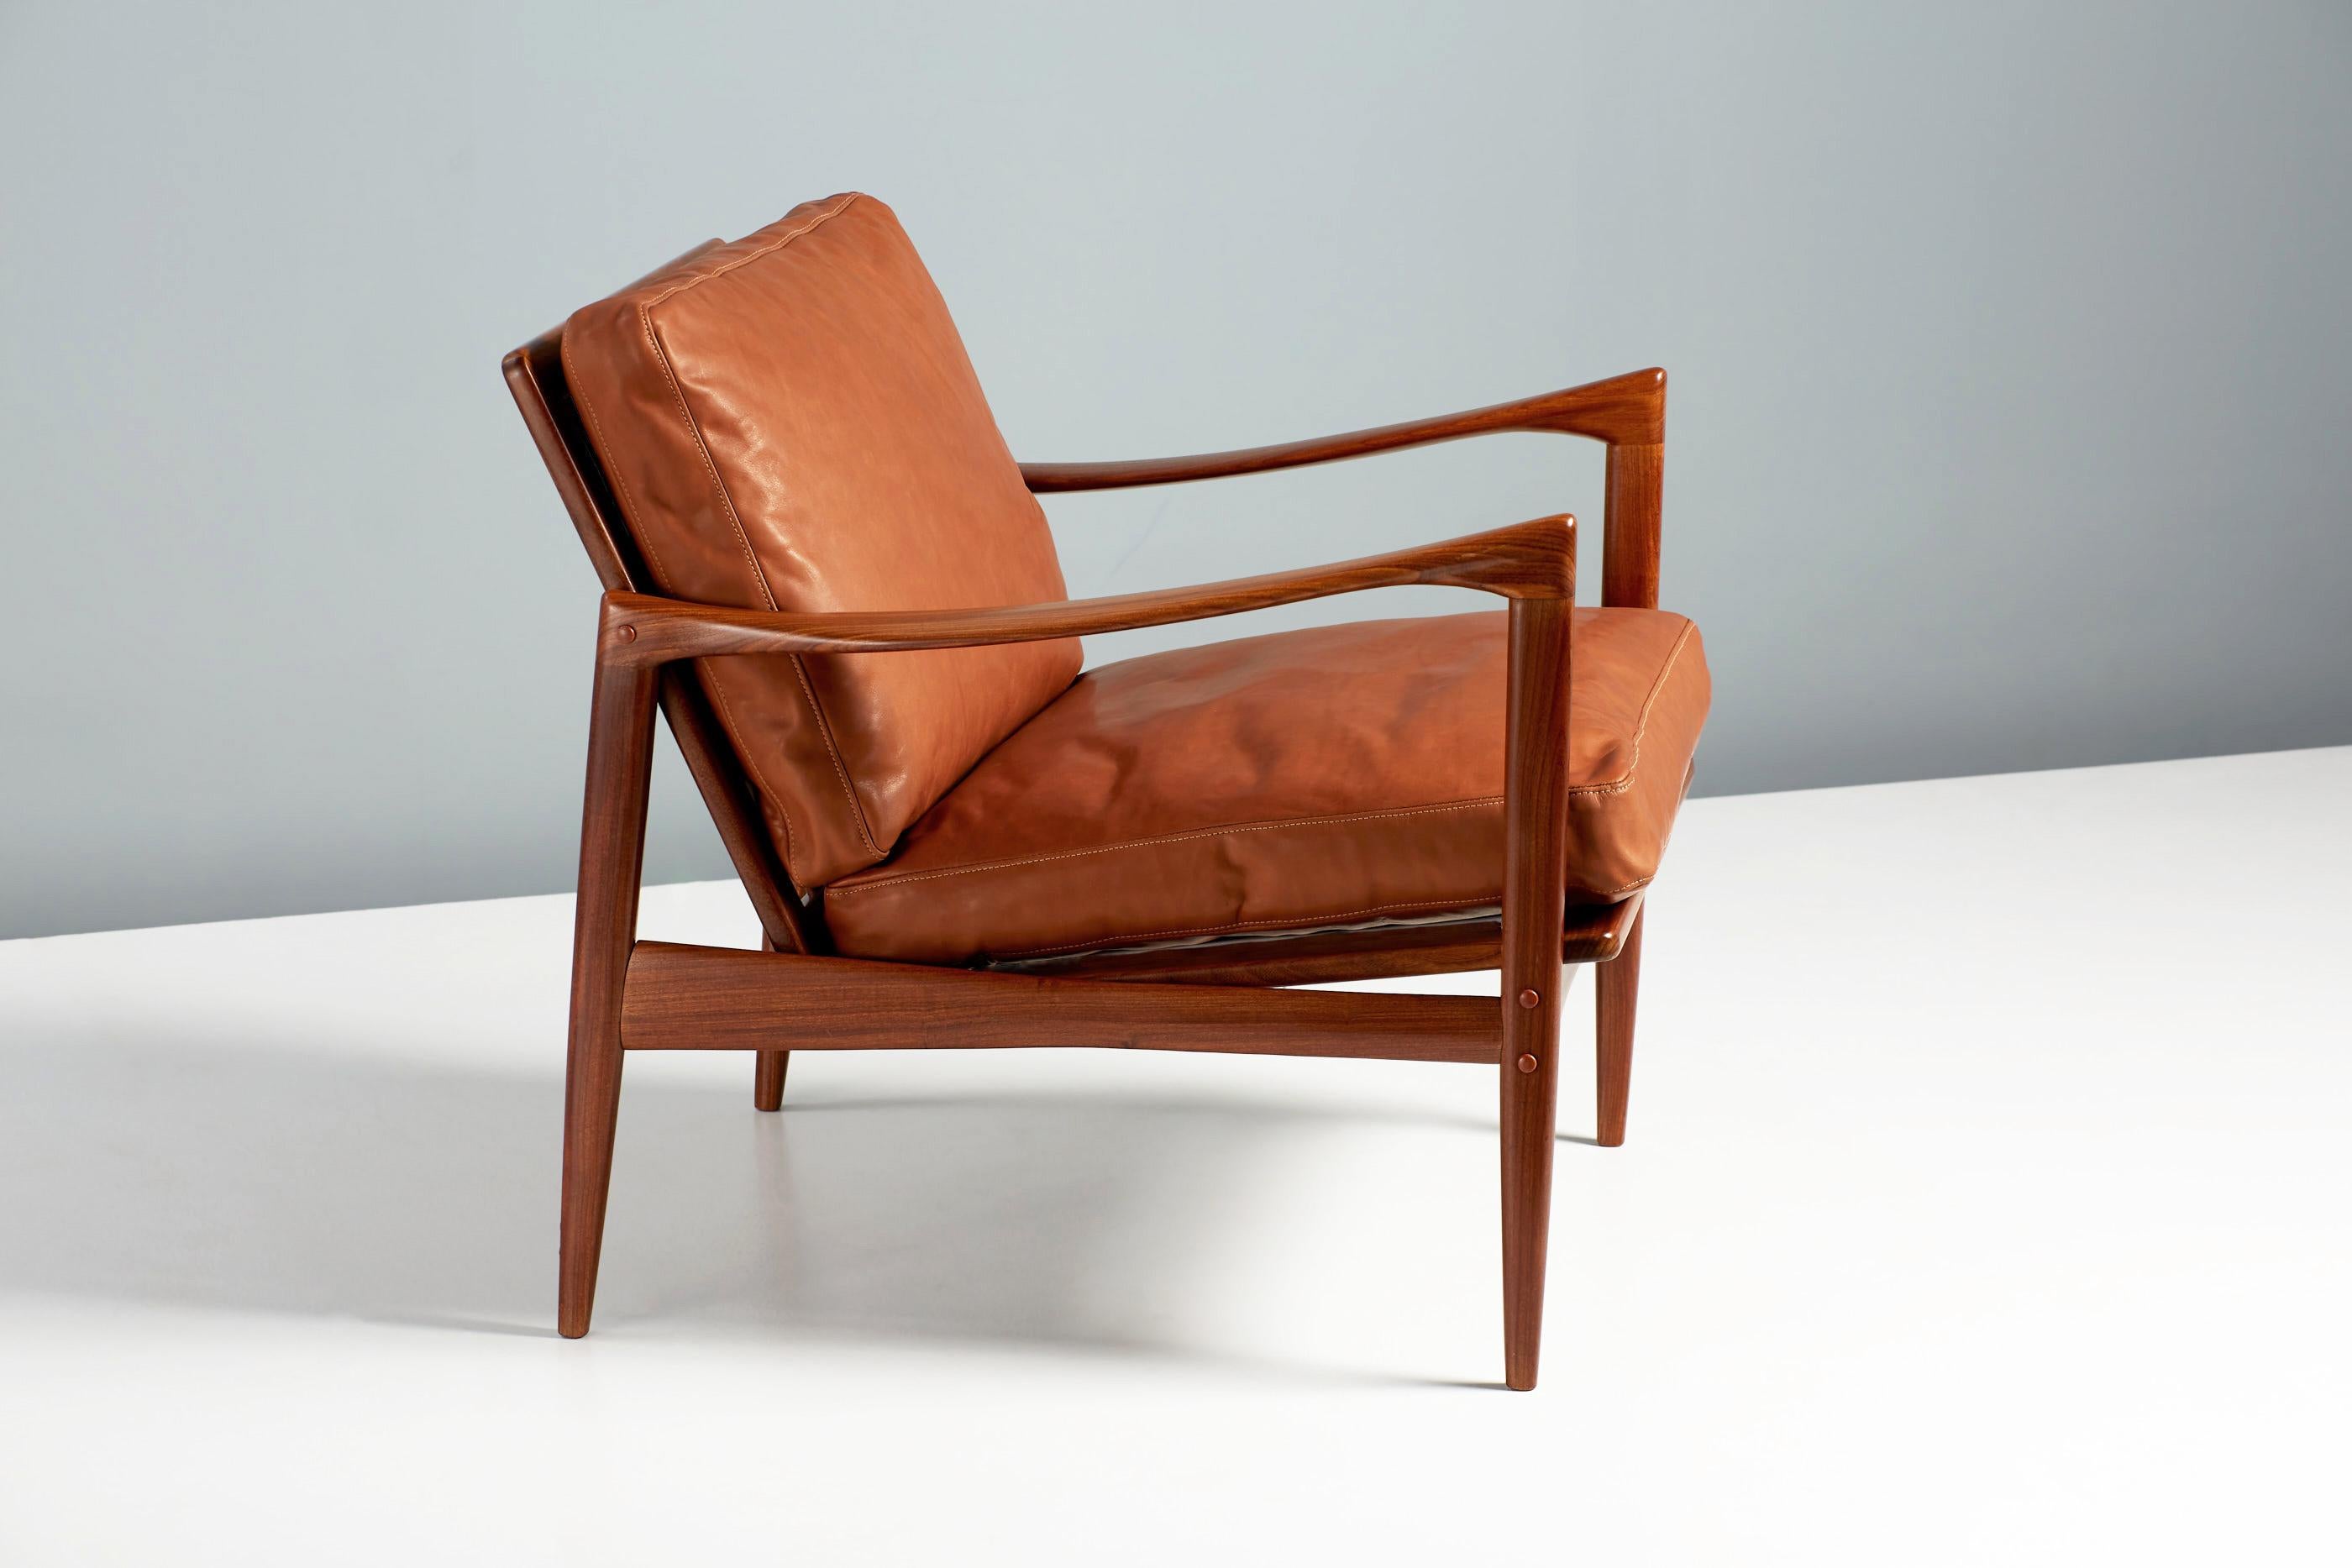 Mid-20th Century Pair of Ib Kofod-Larsen Candidate Chairs, Afromosia Teak For Sale